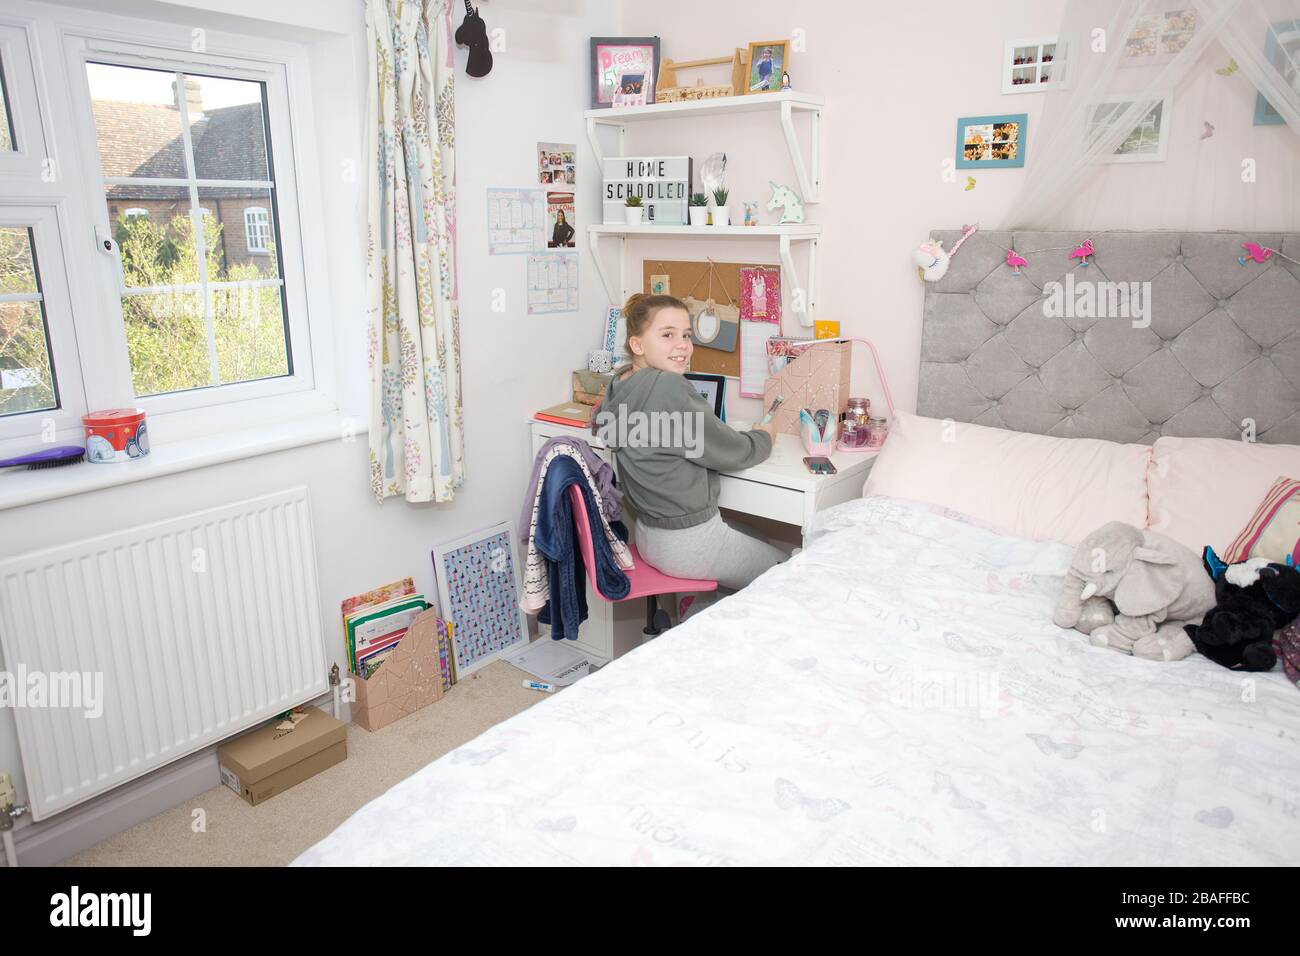 Young girl doing school work from home during coronavirus pandemic, England Stock Photo